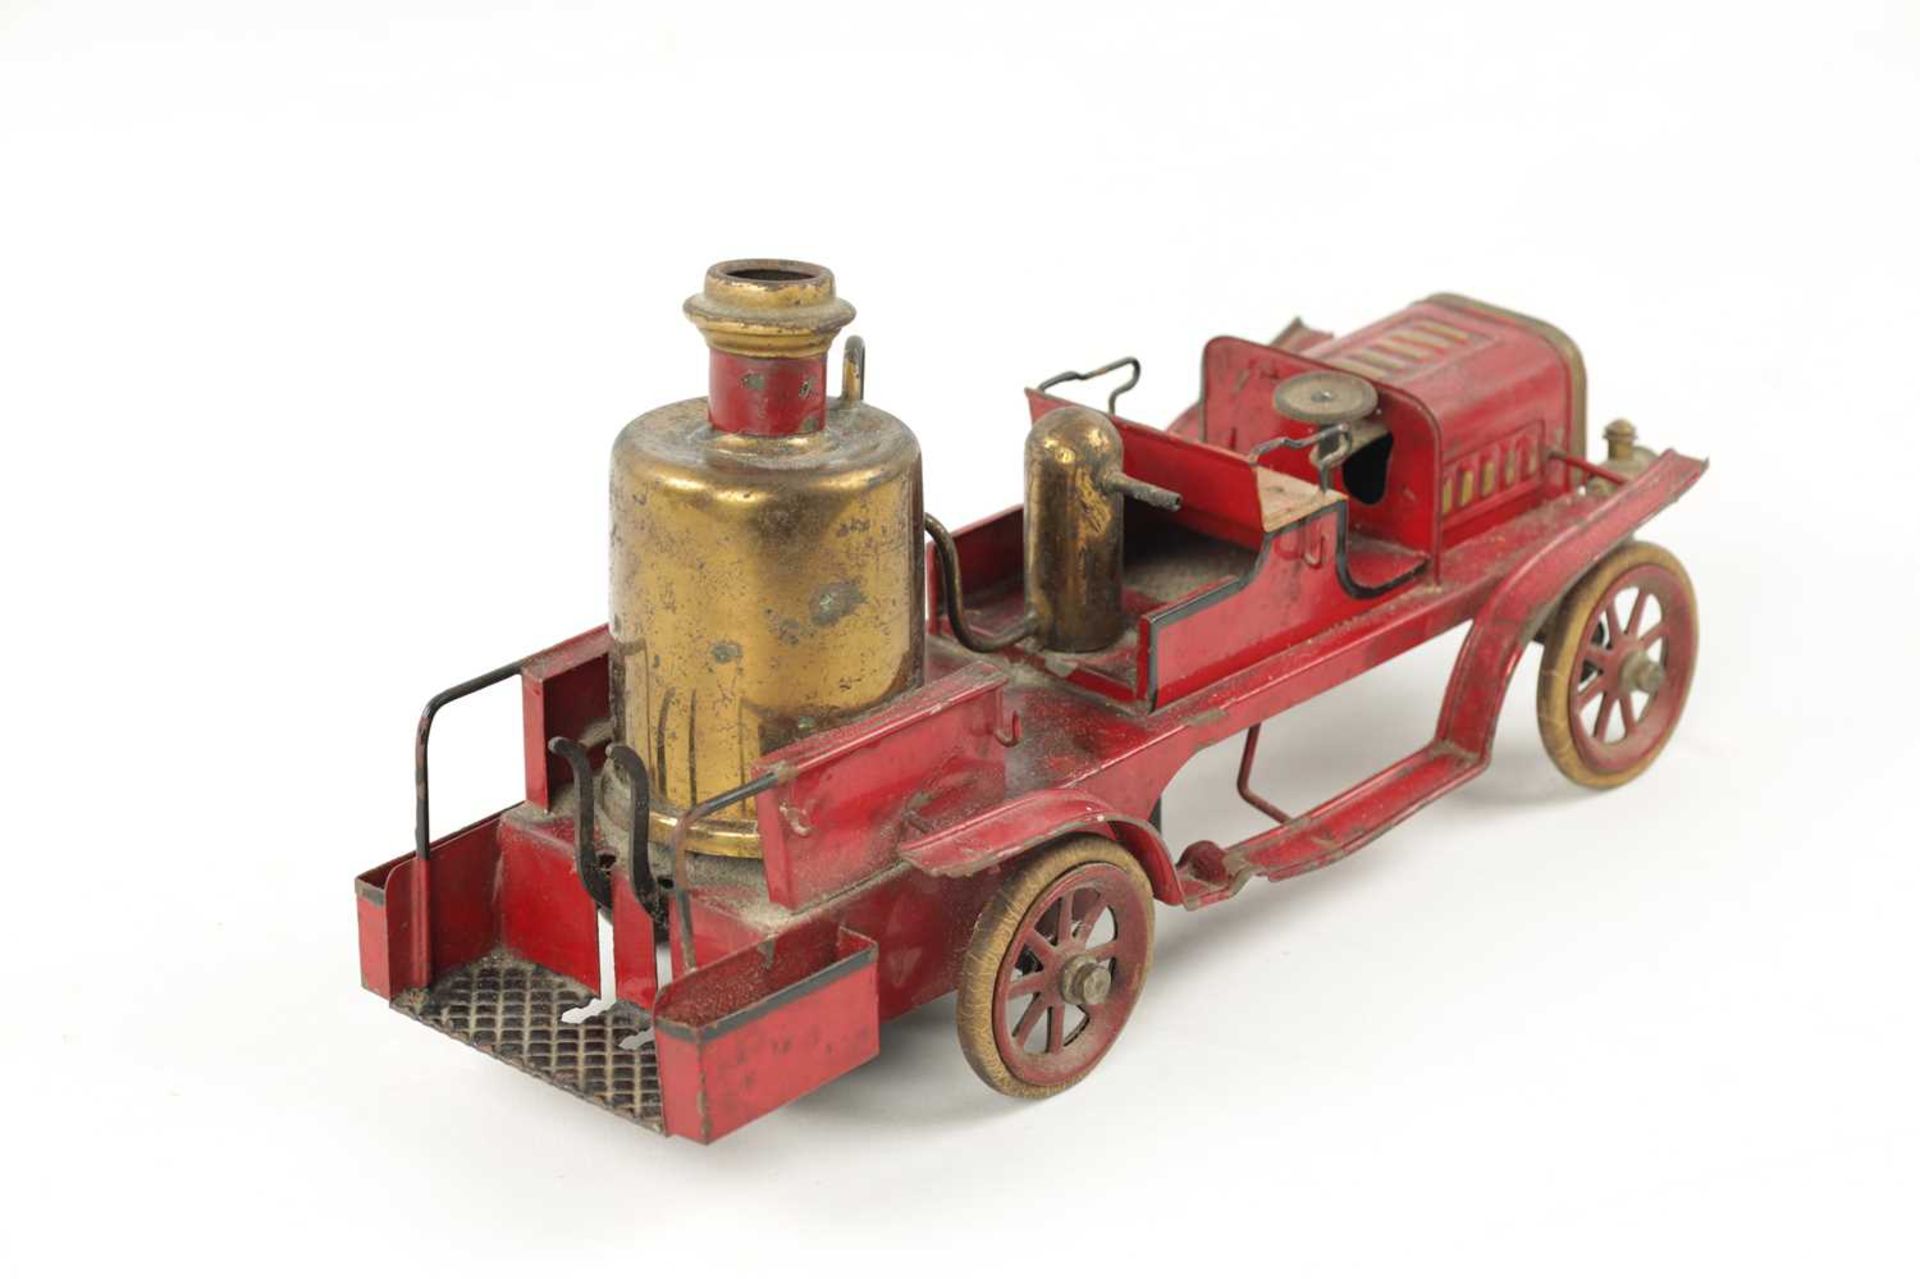 A LATE 20TH CENTURY PRESSED STEEL MUSICAL FIRE 'PUMPER' ENGINE TOY MODEL - Image 5 of 5